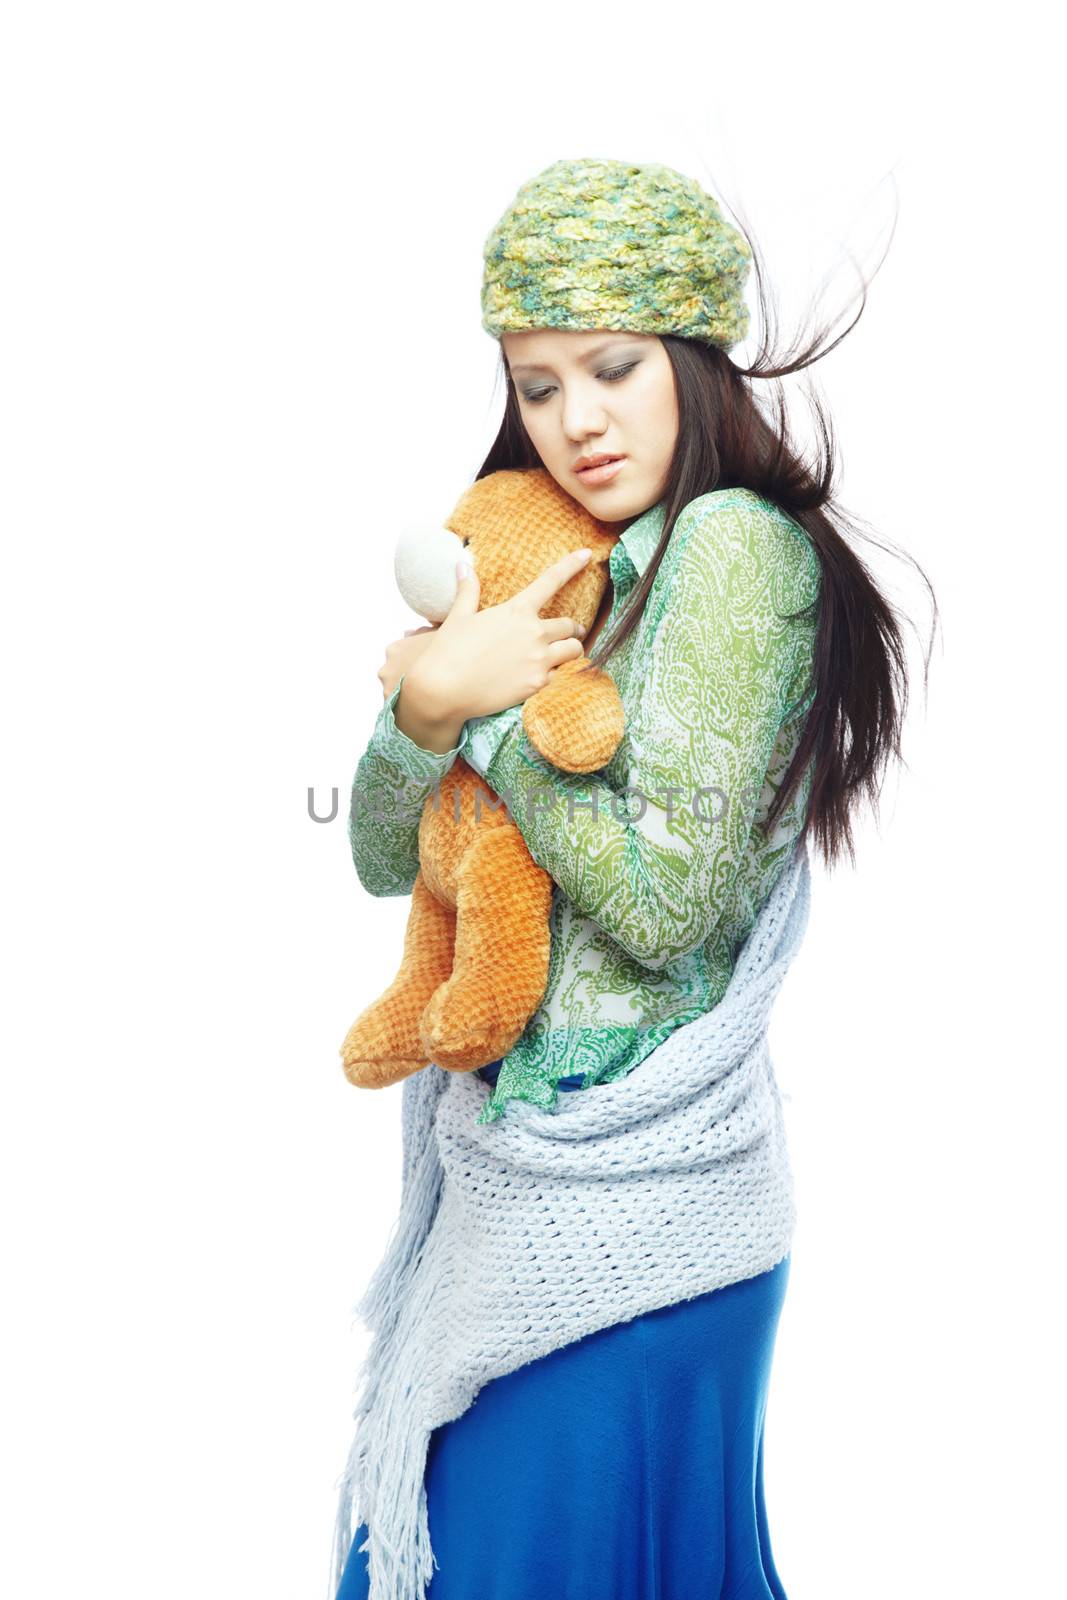 Sad young lady with blown hairs in the stylish clothes embracing Teddy bear on a white background 